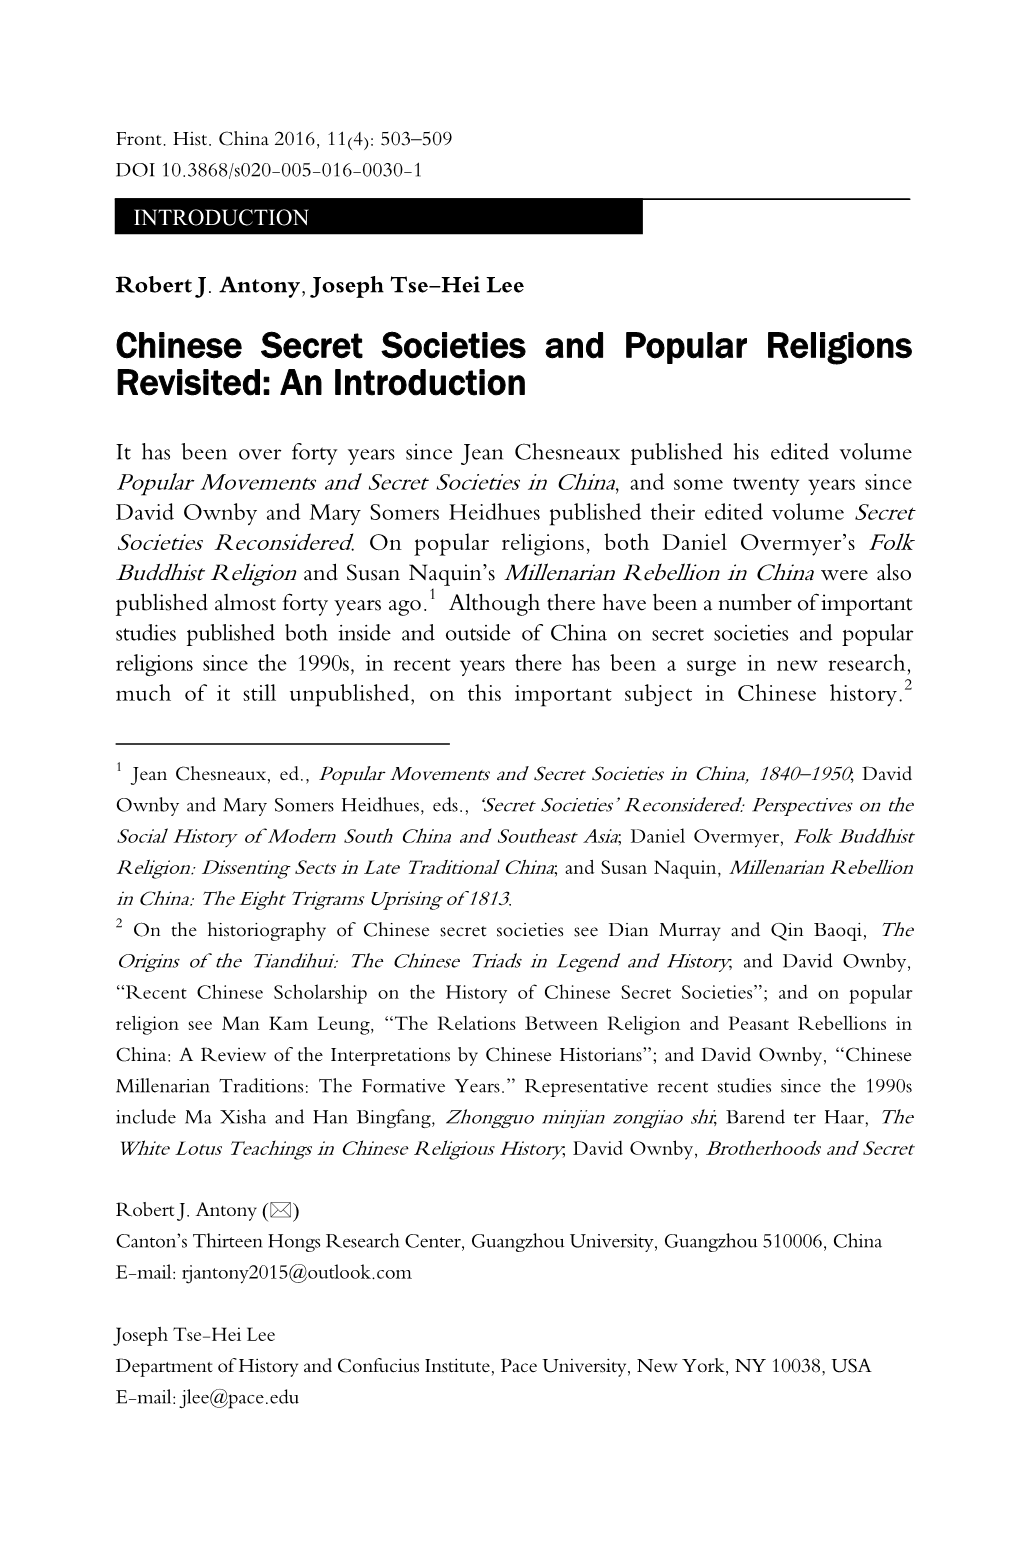 Chinese Secret Societies and Popular Religions Revisited: an Introduction